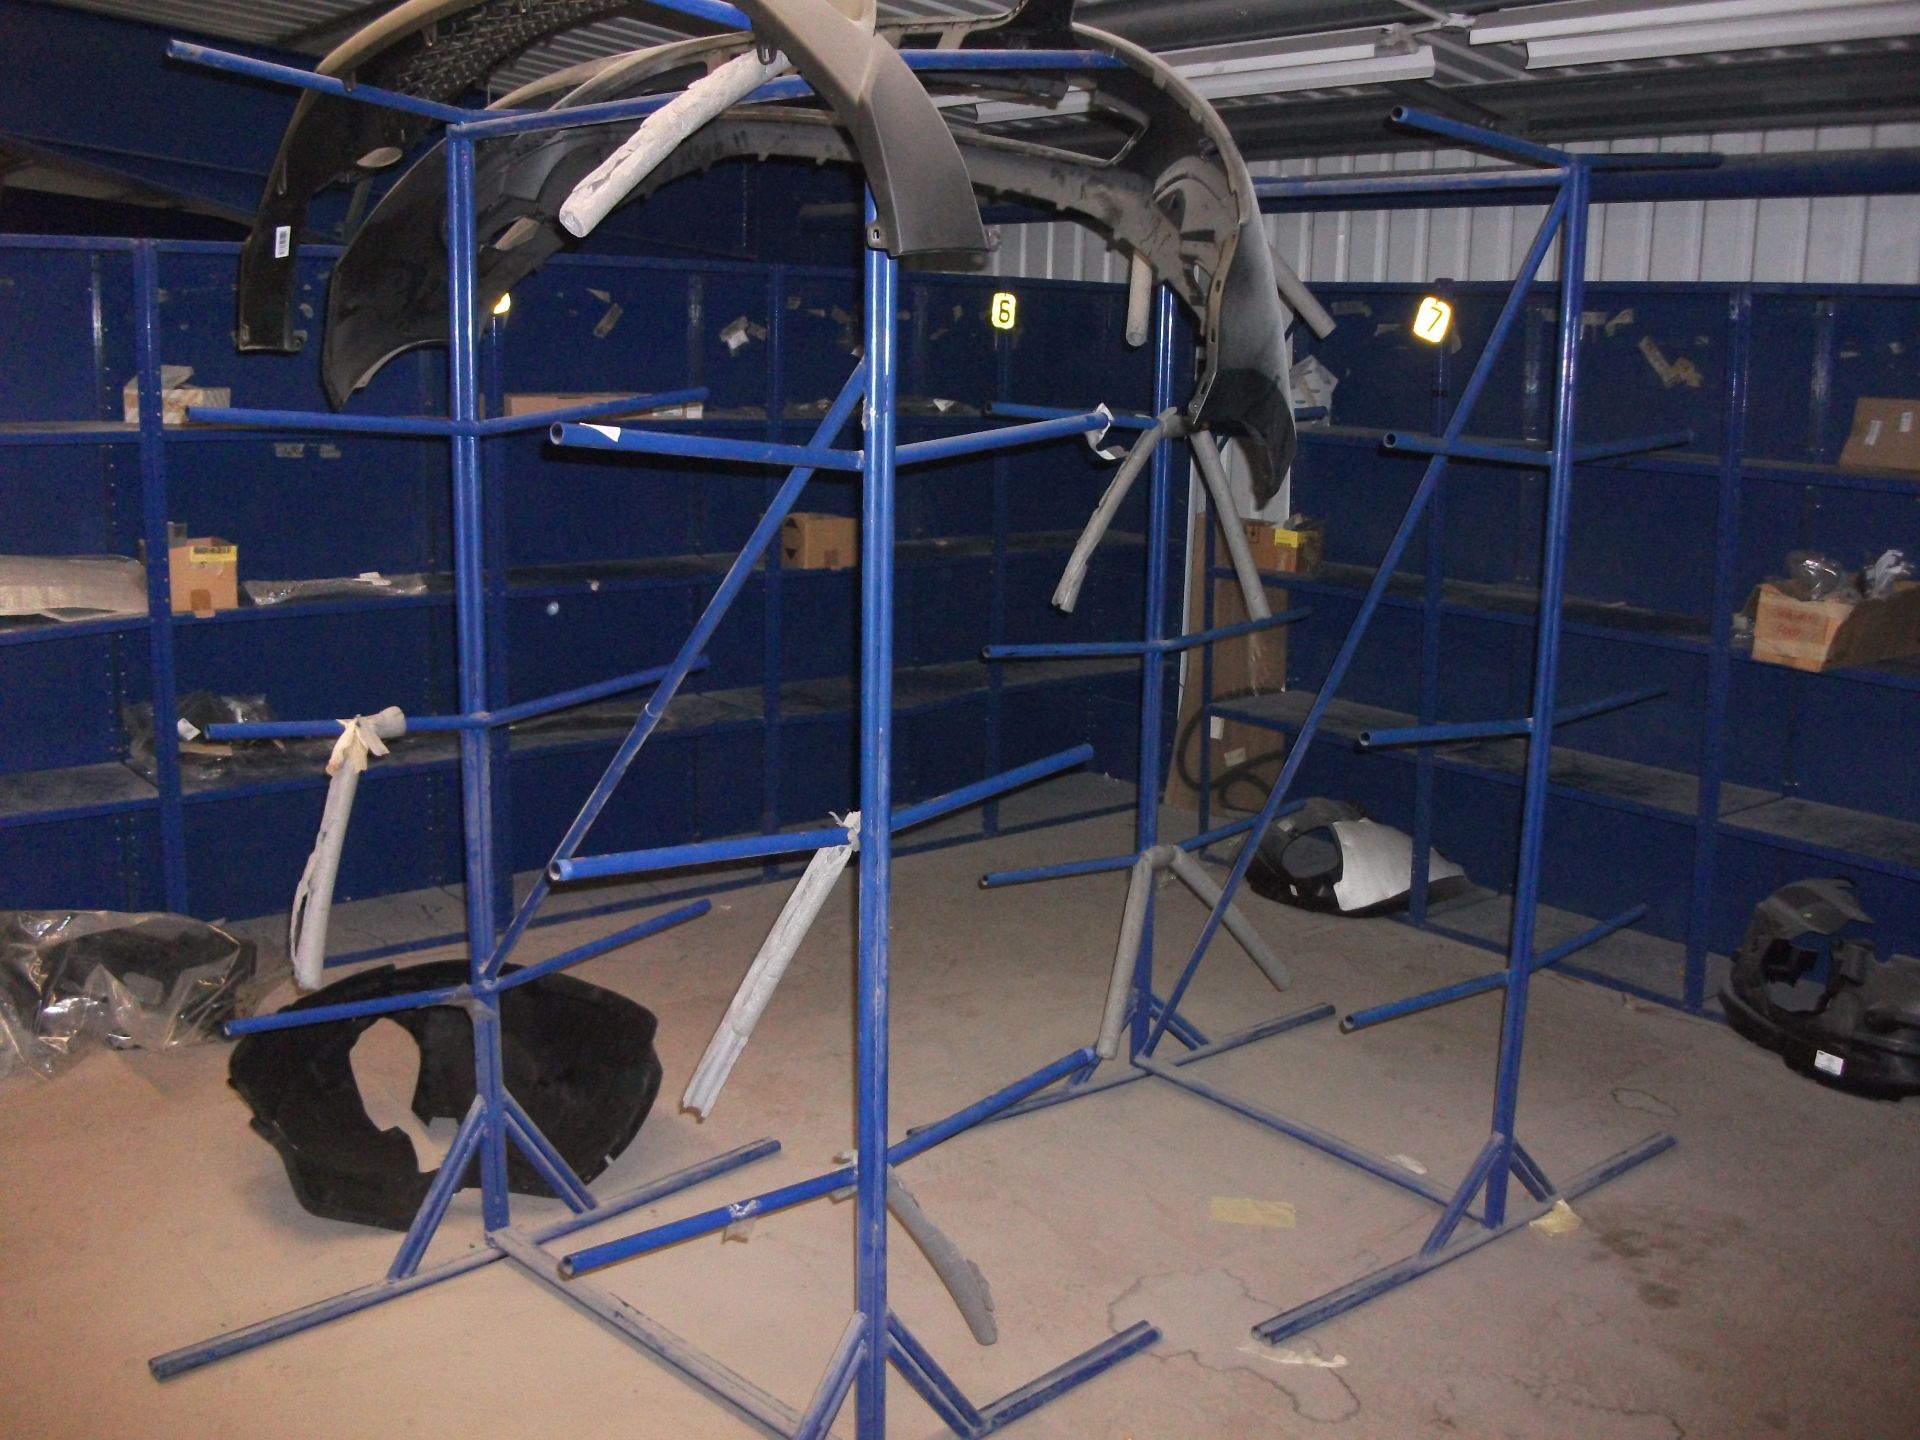 Contents and various racking to under mezzanine storage area and on mezzanine - Image 4 of 9